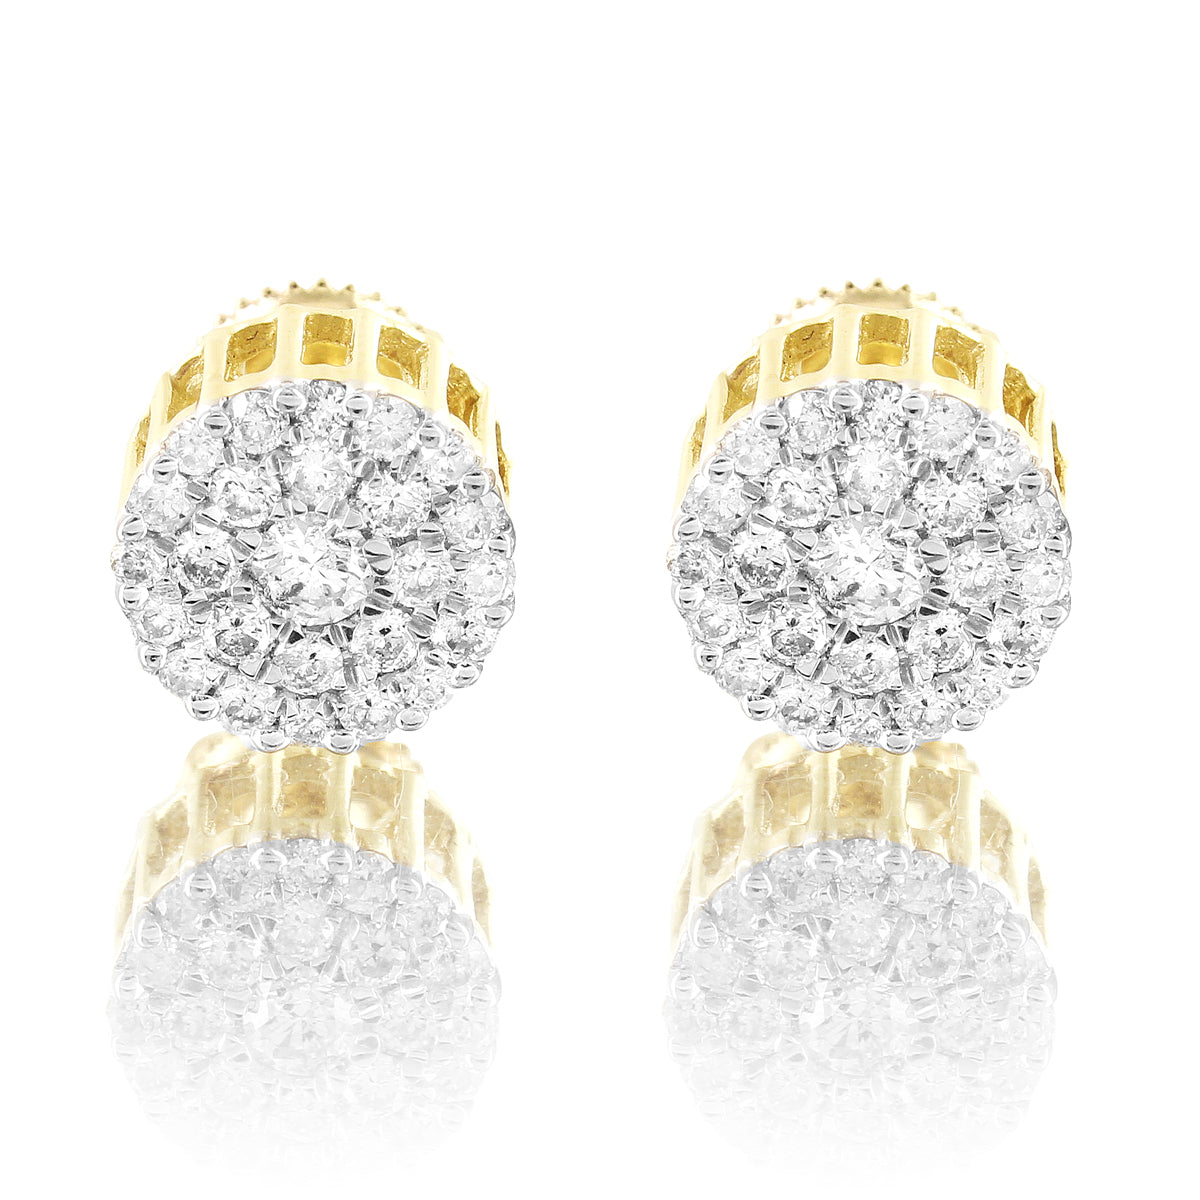 10k Gold Solitaire Cluster Icy Genuine Diamonds Screw Back Earrings